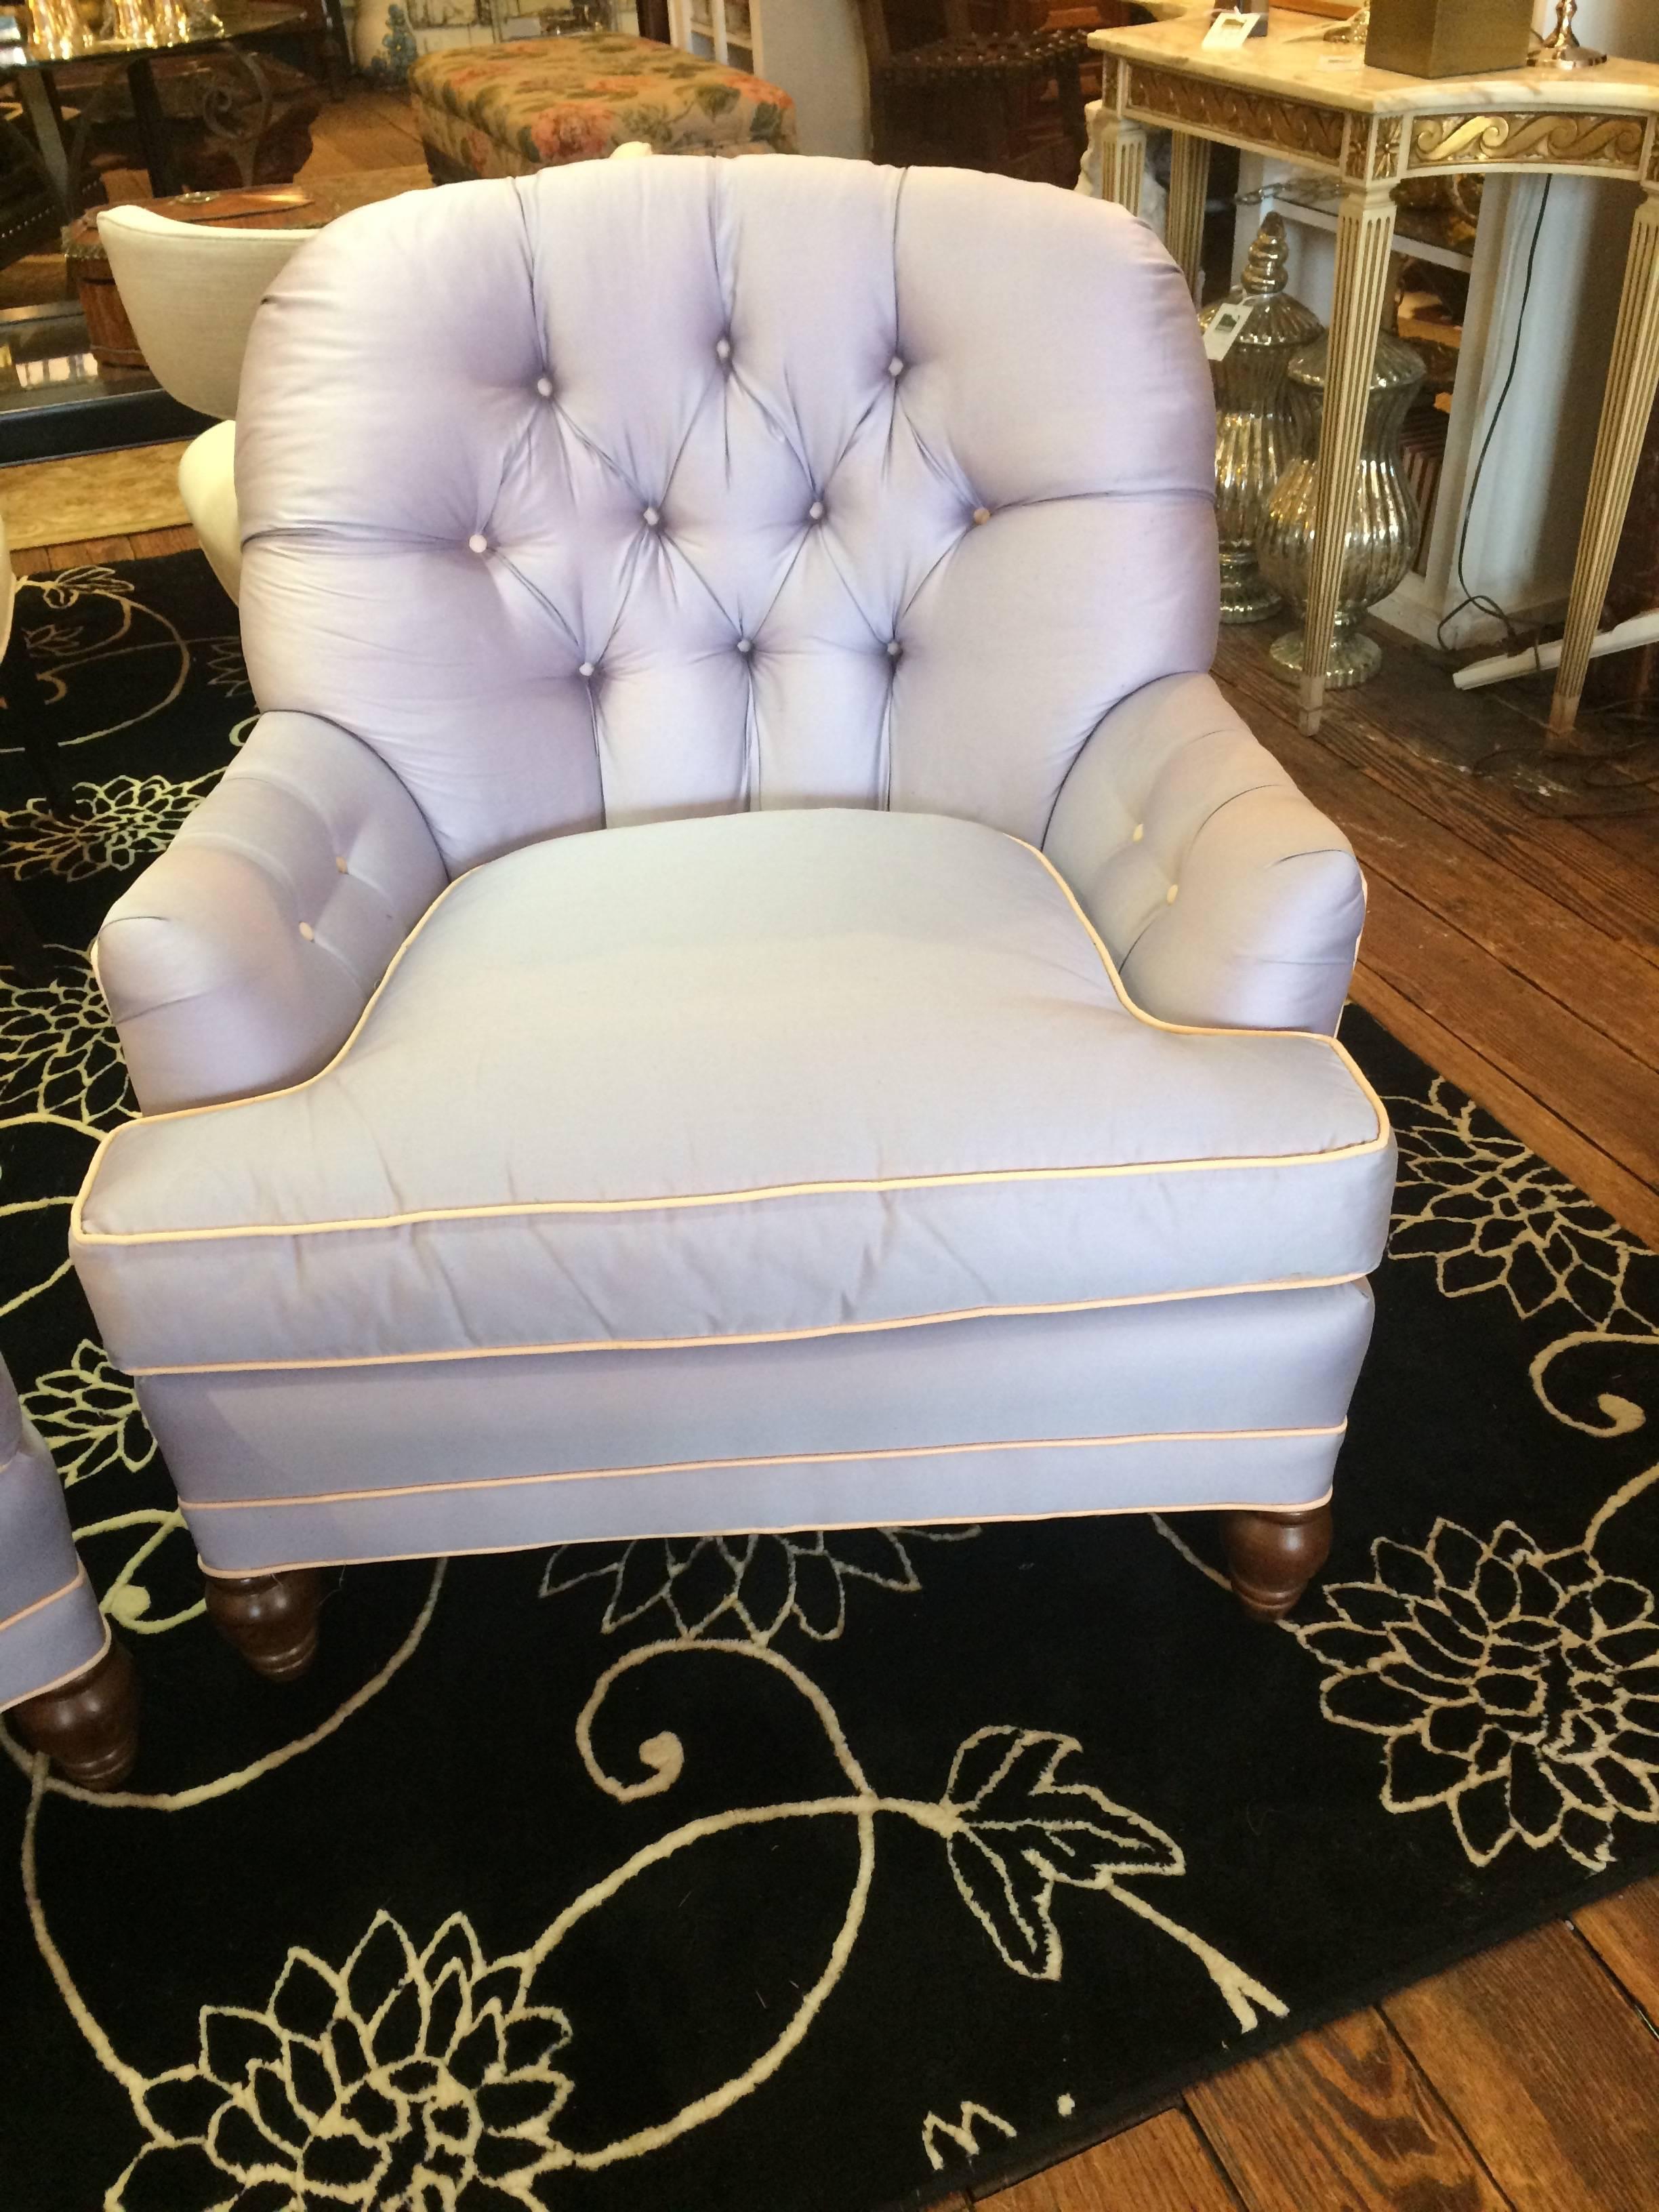 Cotton Luxurious Tufted Club Chairs in a Heavenly Light Blue